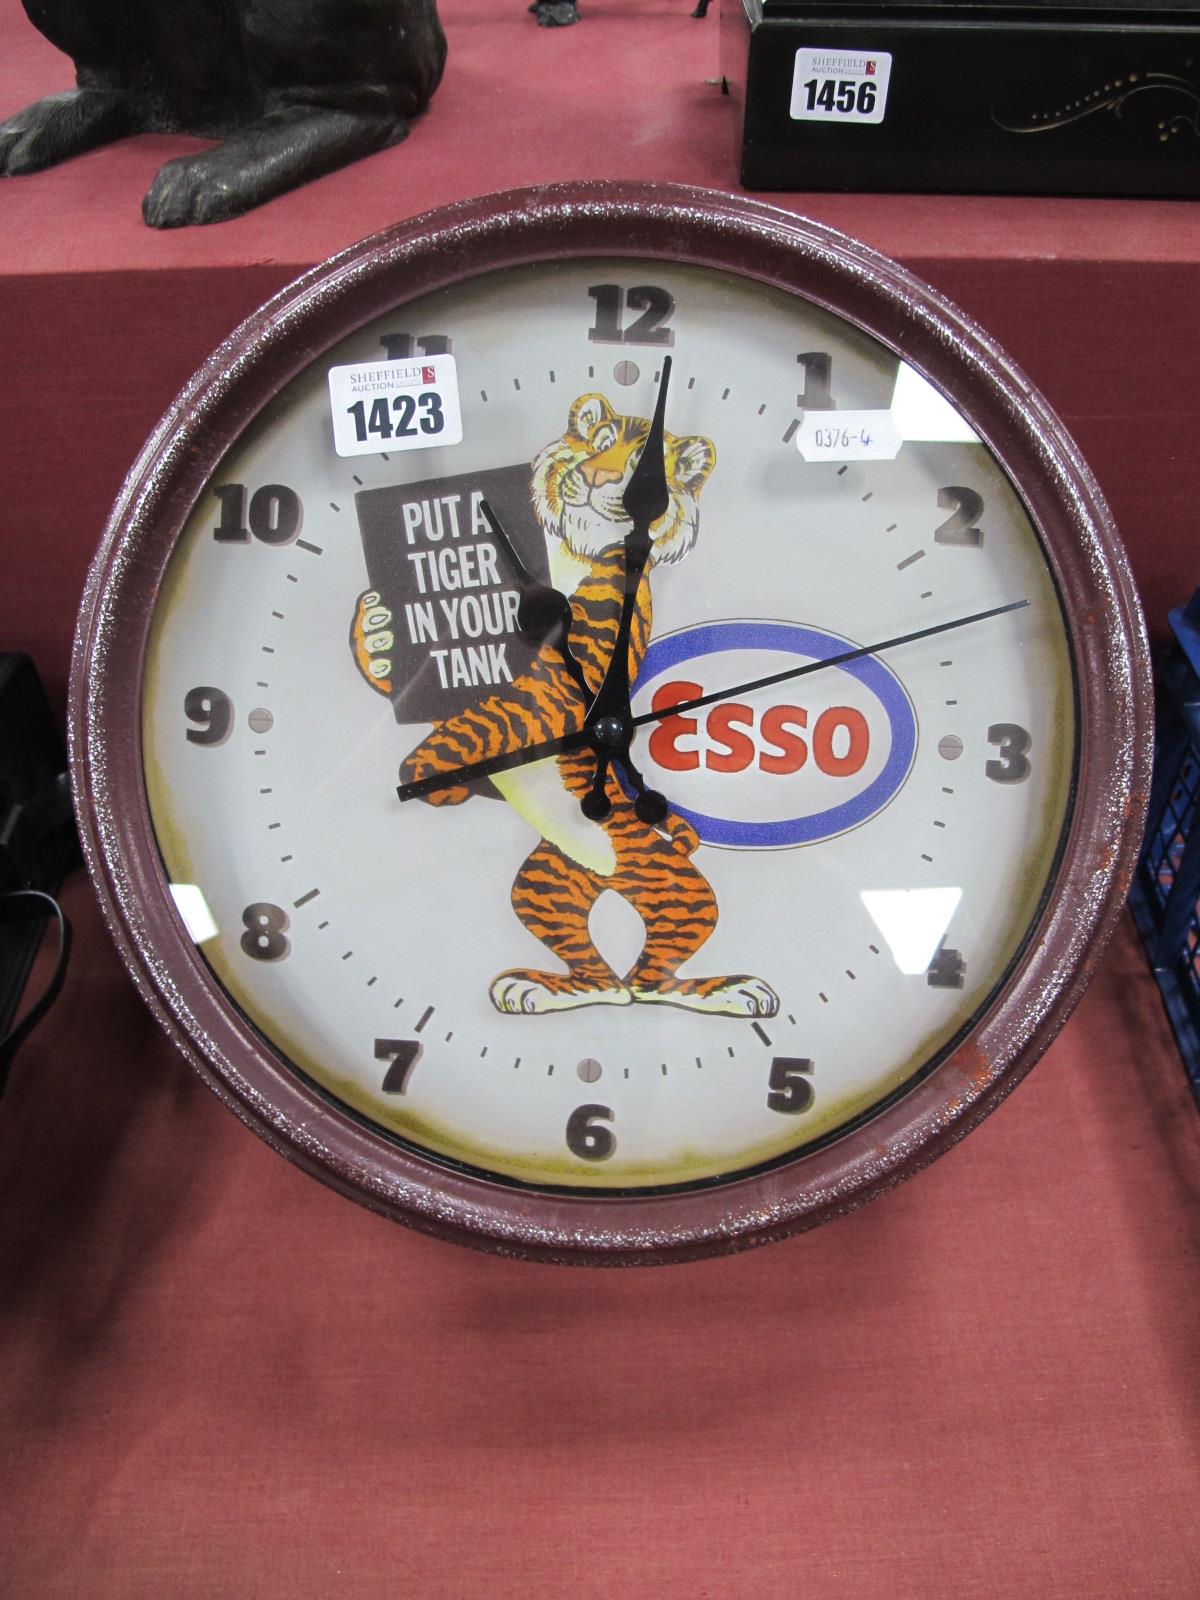 A Circular Esso Wall Clock, - Put a Tiger in Your Tank.